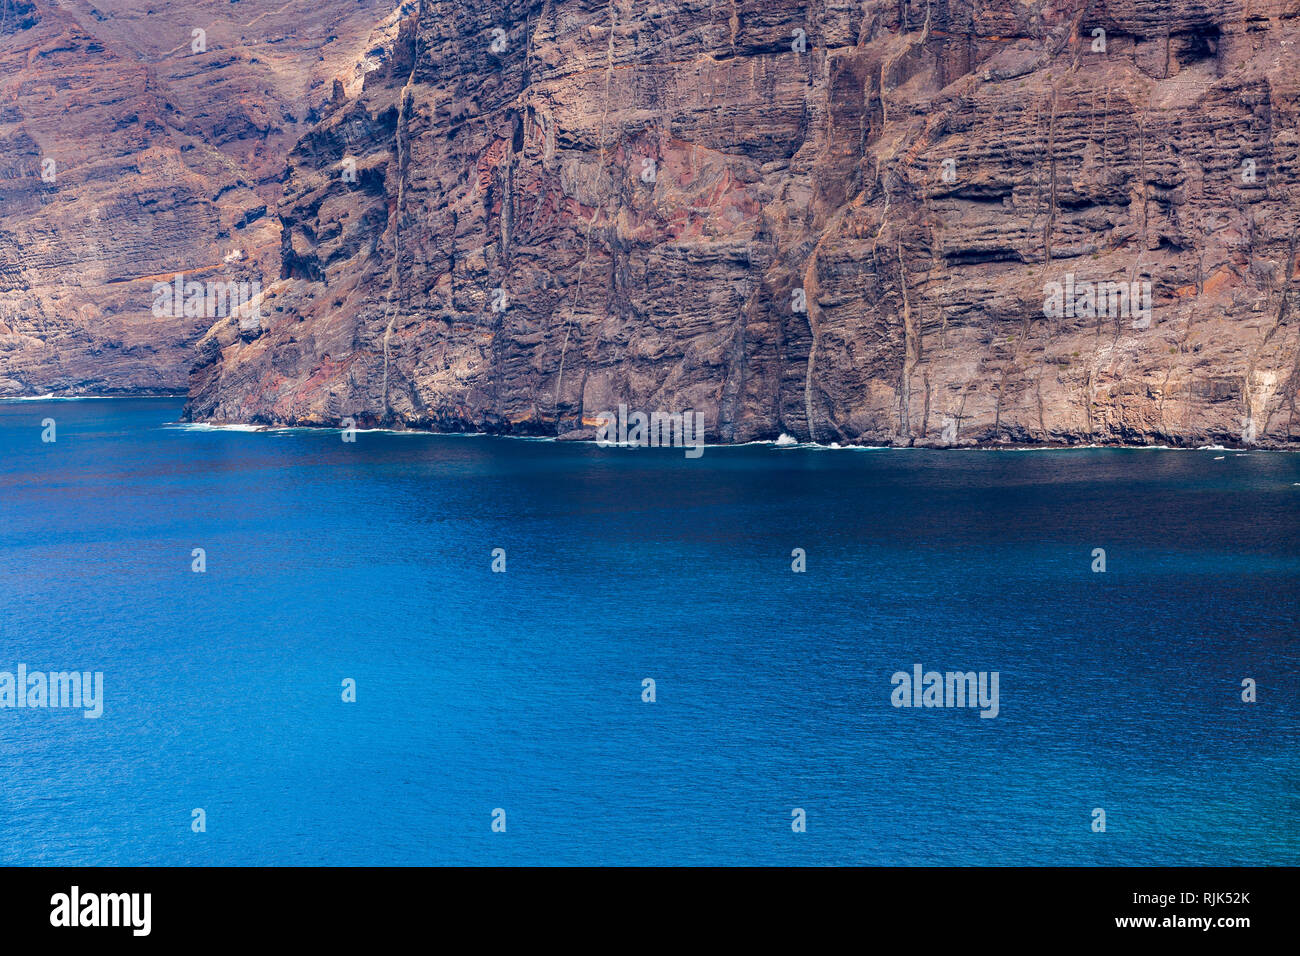 Sheer seacliffs of Los Gigantes  with seamed rugged rock faces meet the calm blue atlantic ocean on the west coast of Tenerife, Canary Islands, Spain Stock Photo